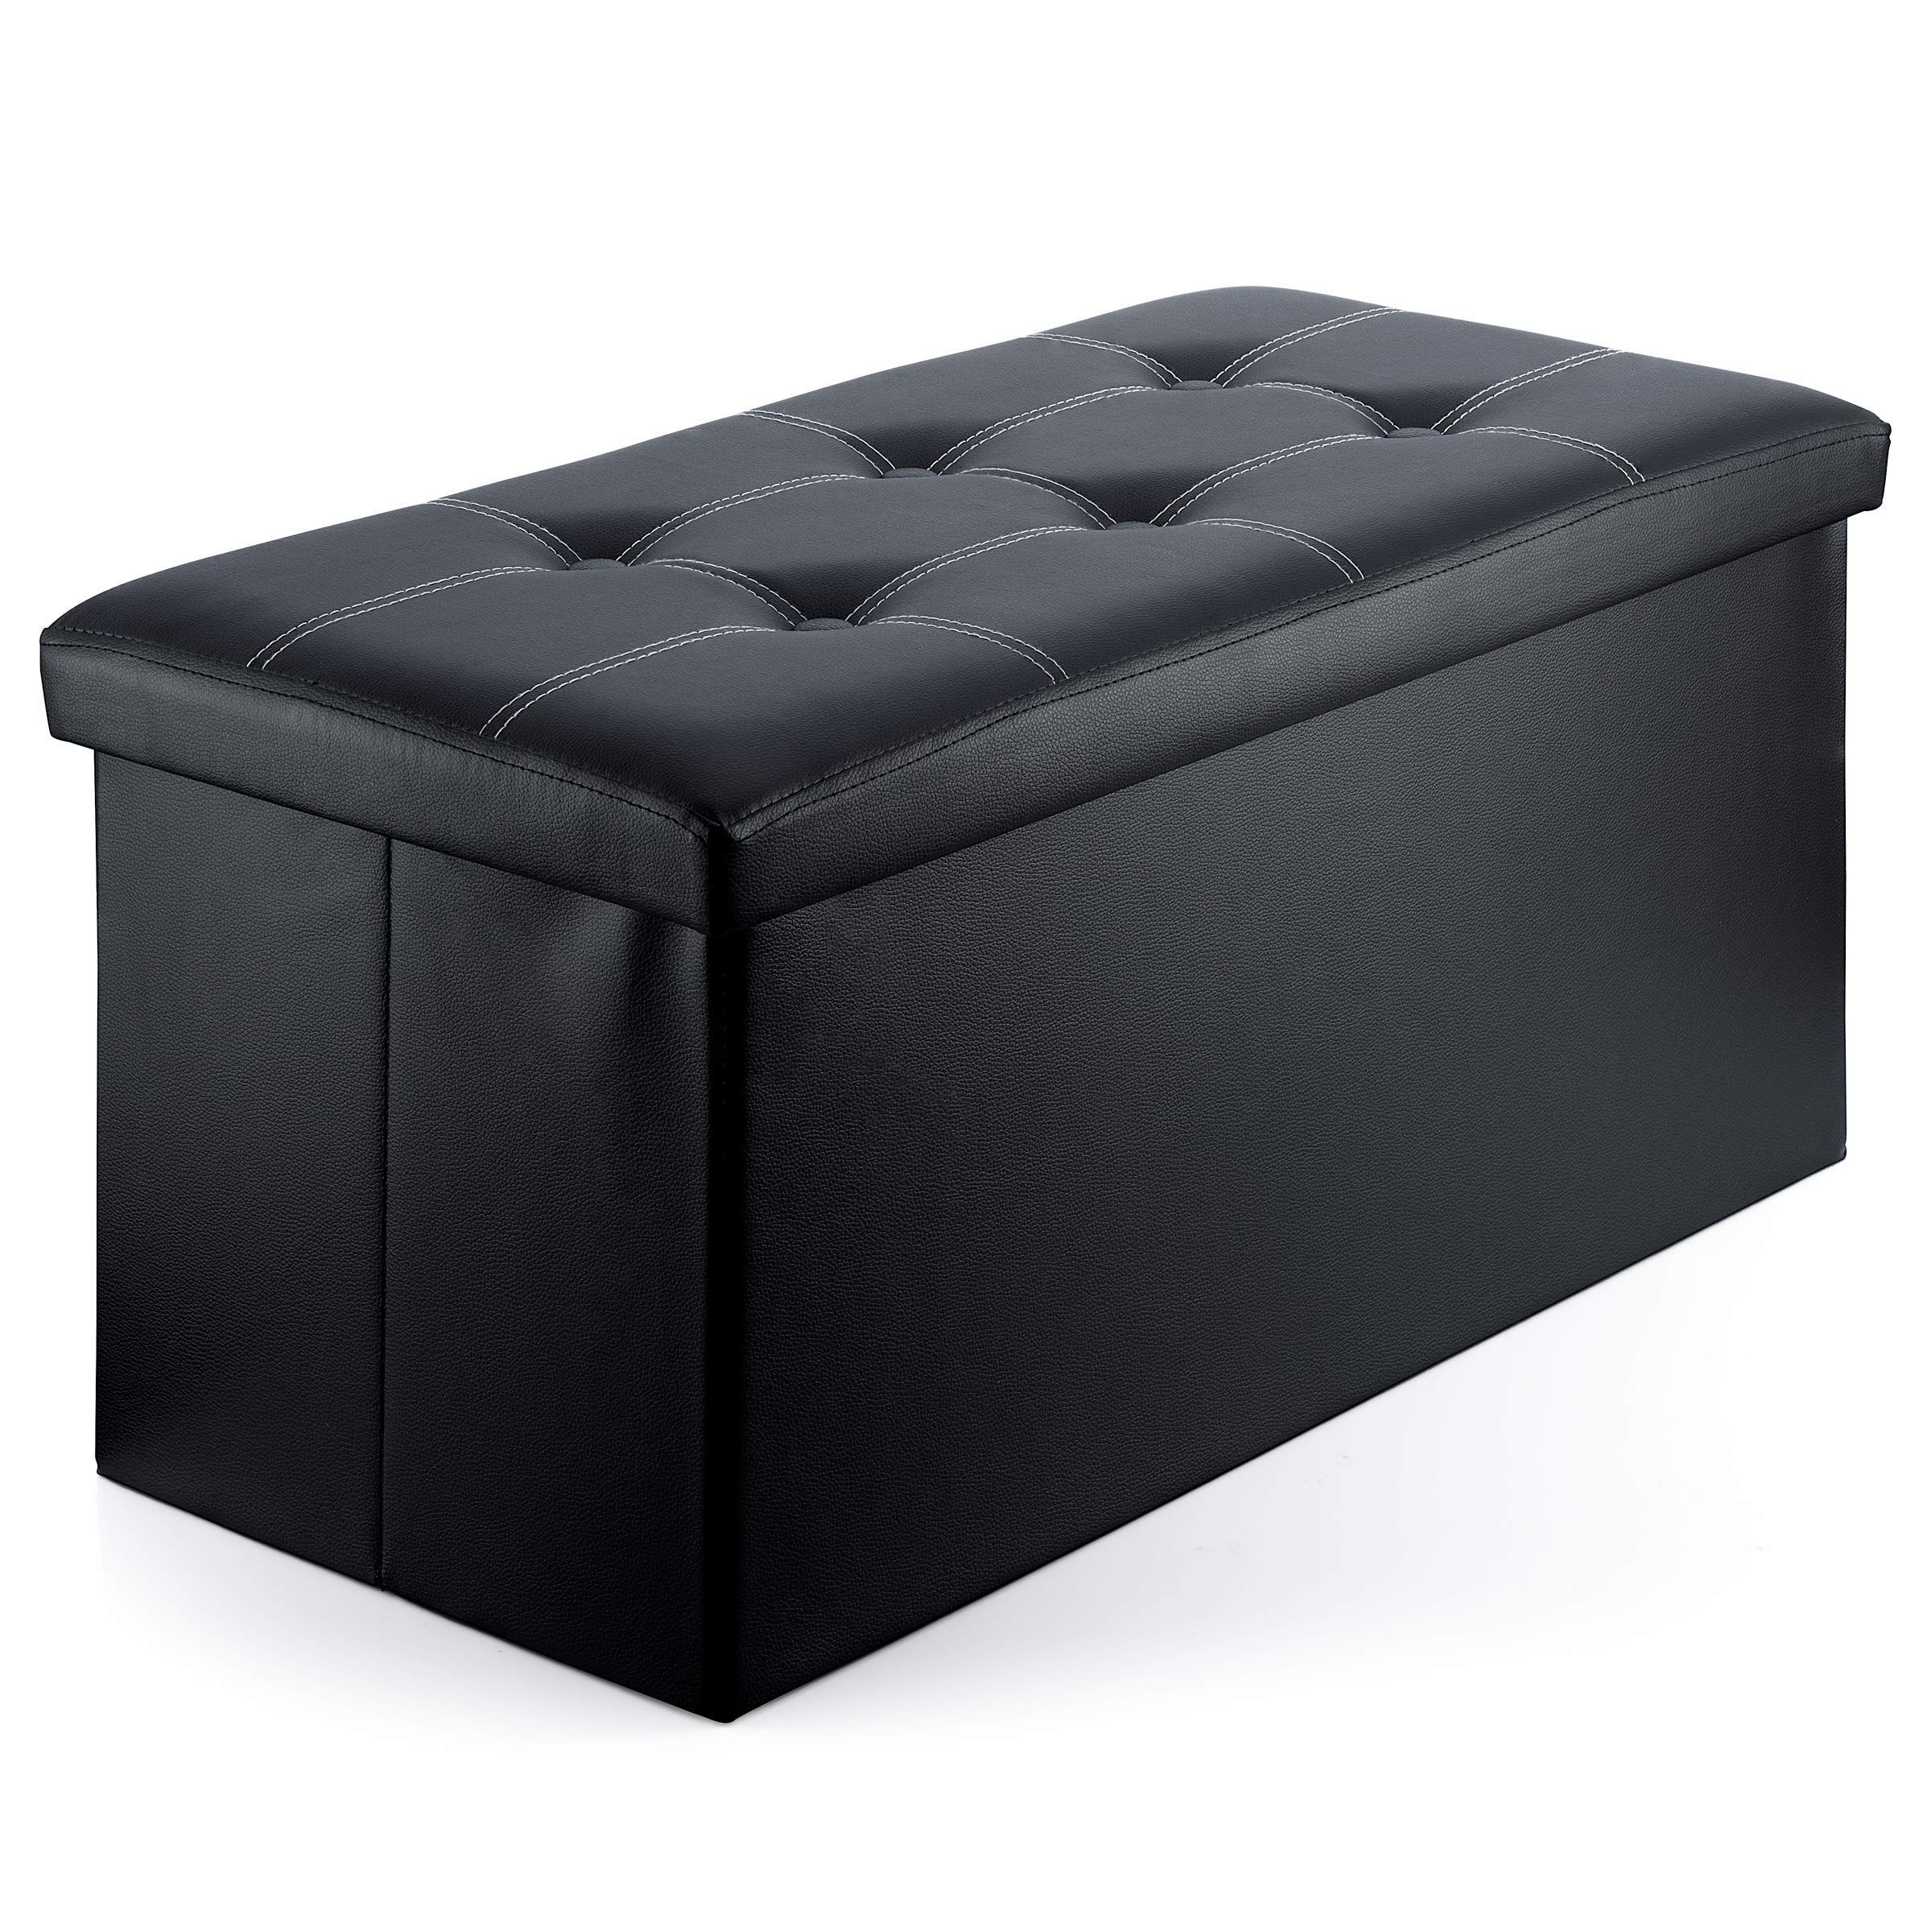 Decor Hut Folding Storage Bench Hidden Storage Ottoman With Cover Faux Regarding Black Faux Leather Tufted Ottomans (View 12 of 20)